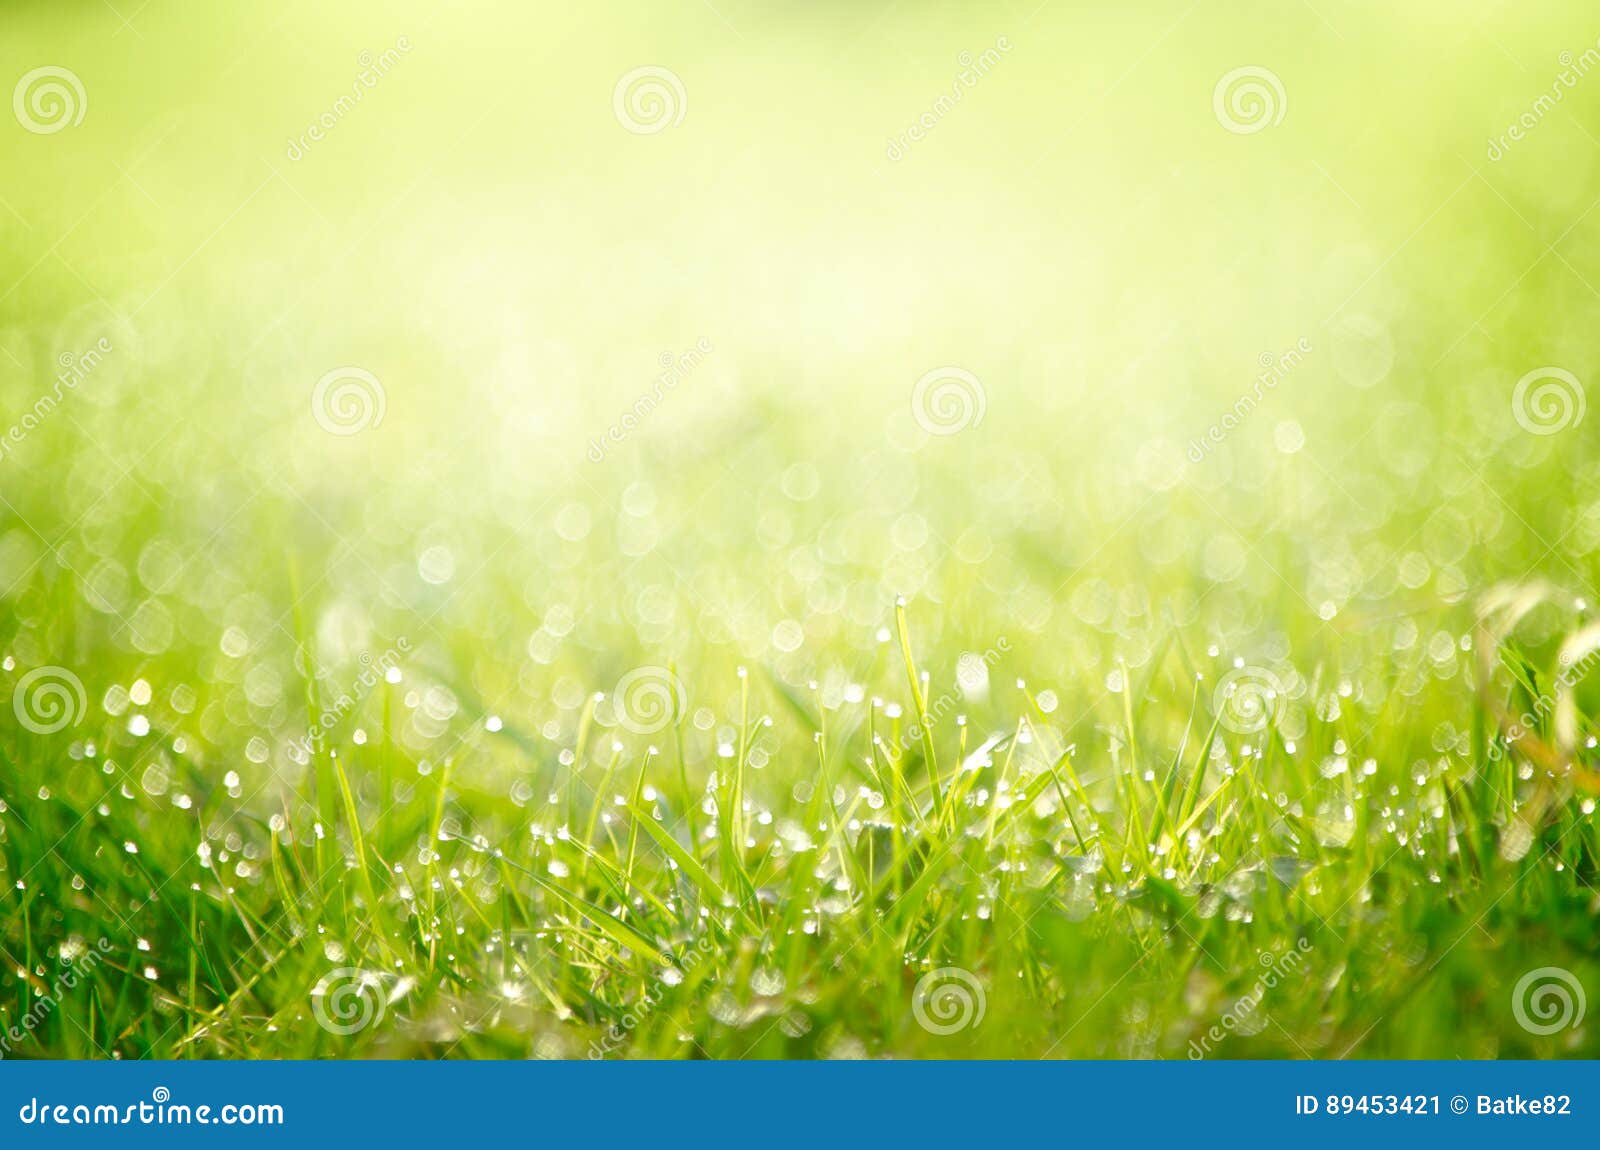 Dewy grass background stock image. Image of spring, lawn - 89453421